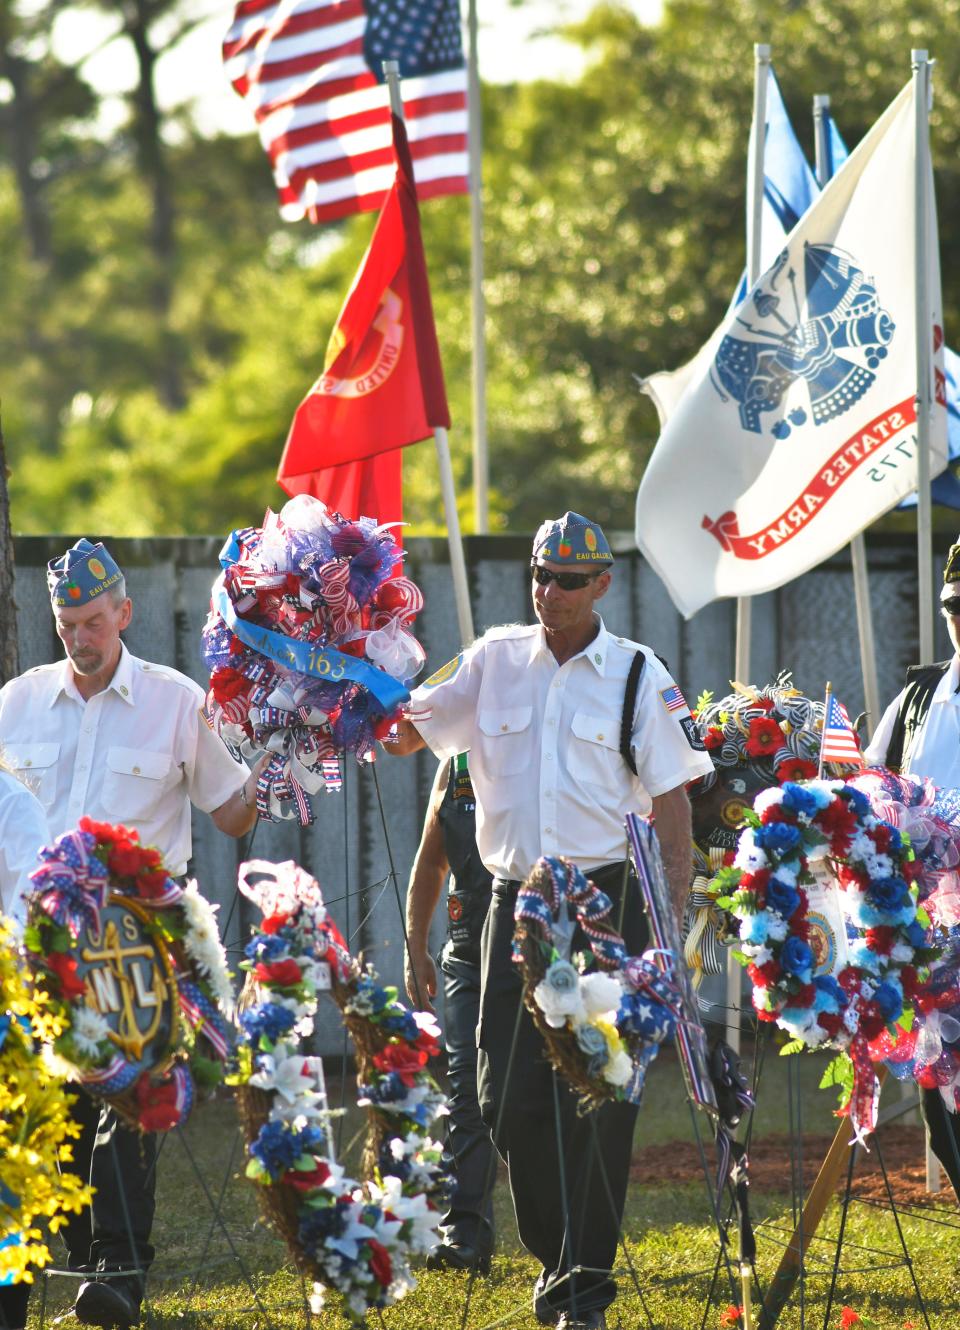 The Monday evening placing of the wreaths and opening ceremony at the Vietnam Traveling Memorial Wall at Wickham Park in Melbourne.